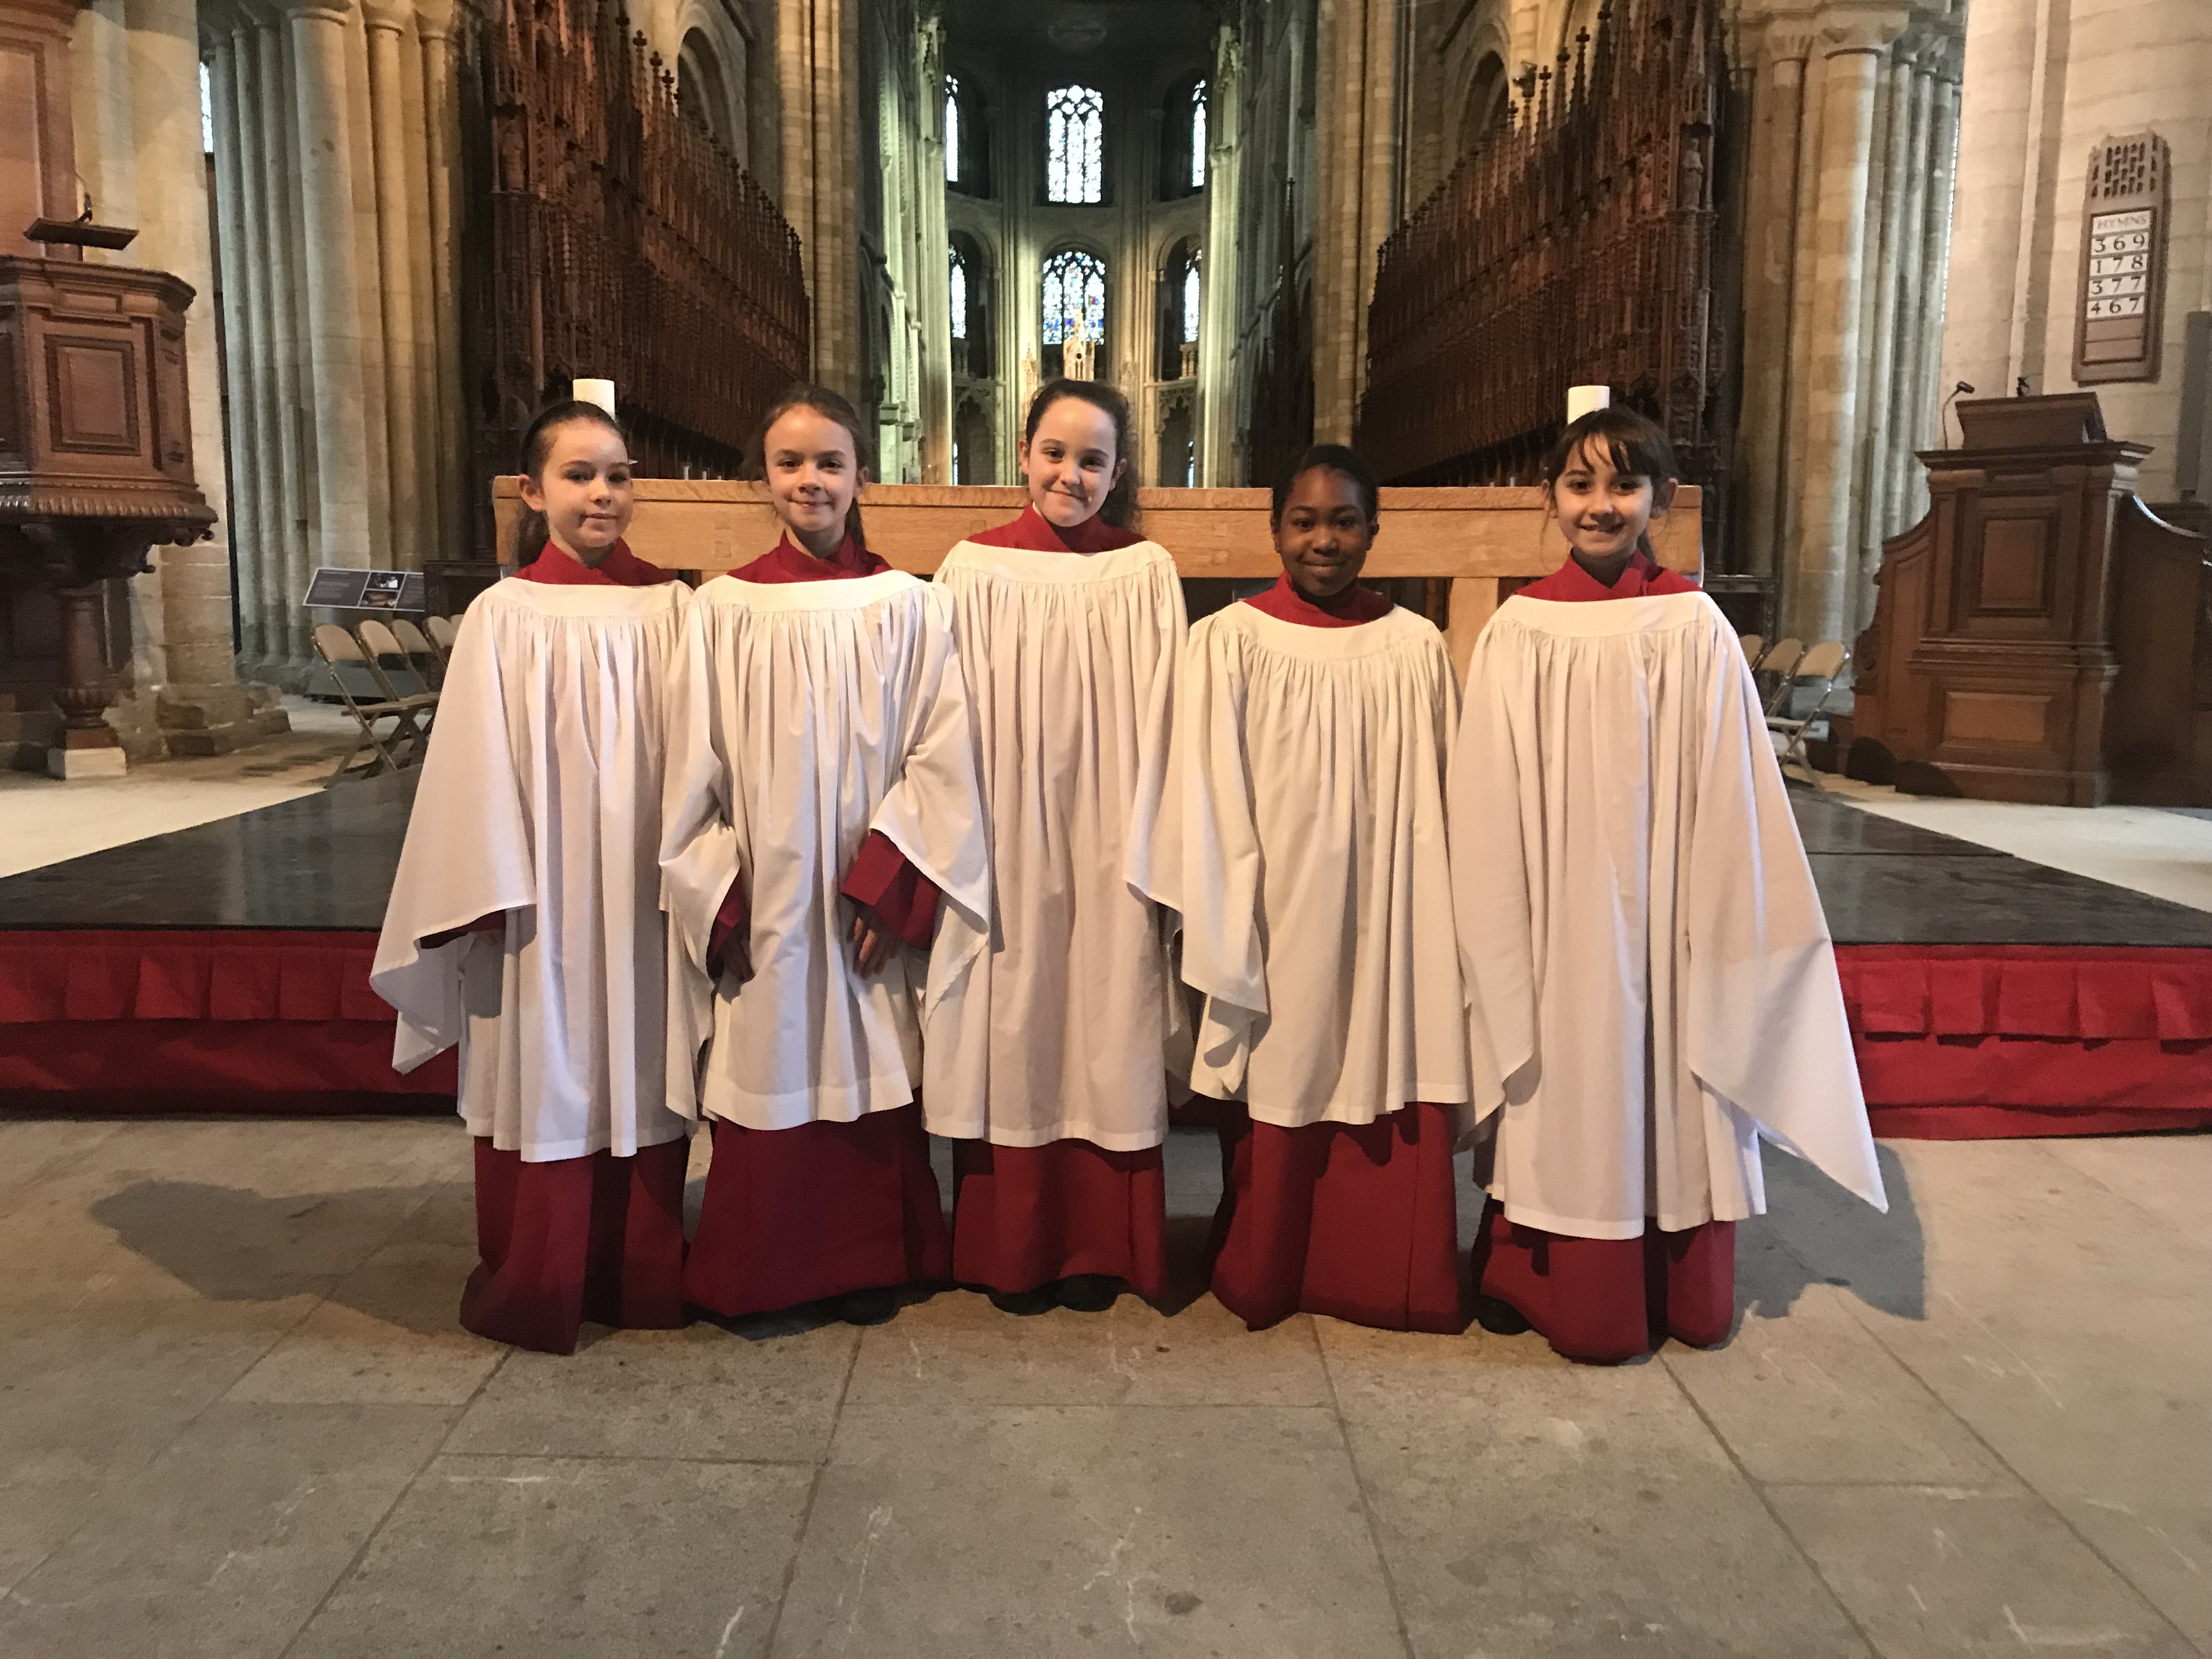 Girl choristers in their surplices